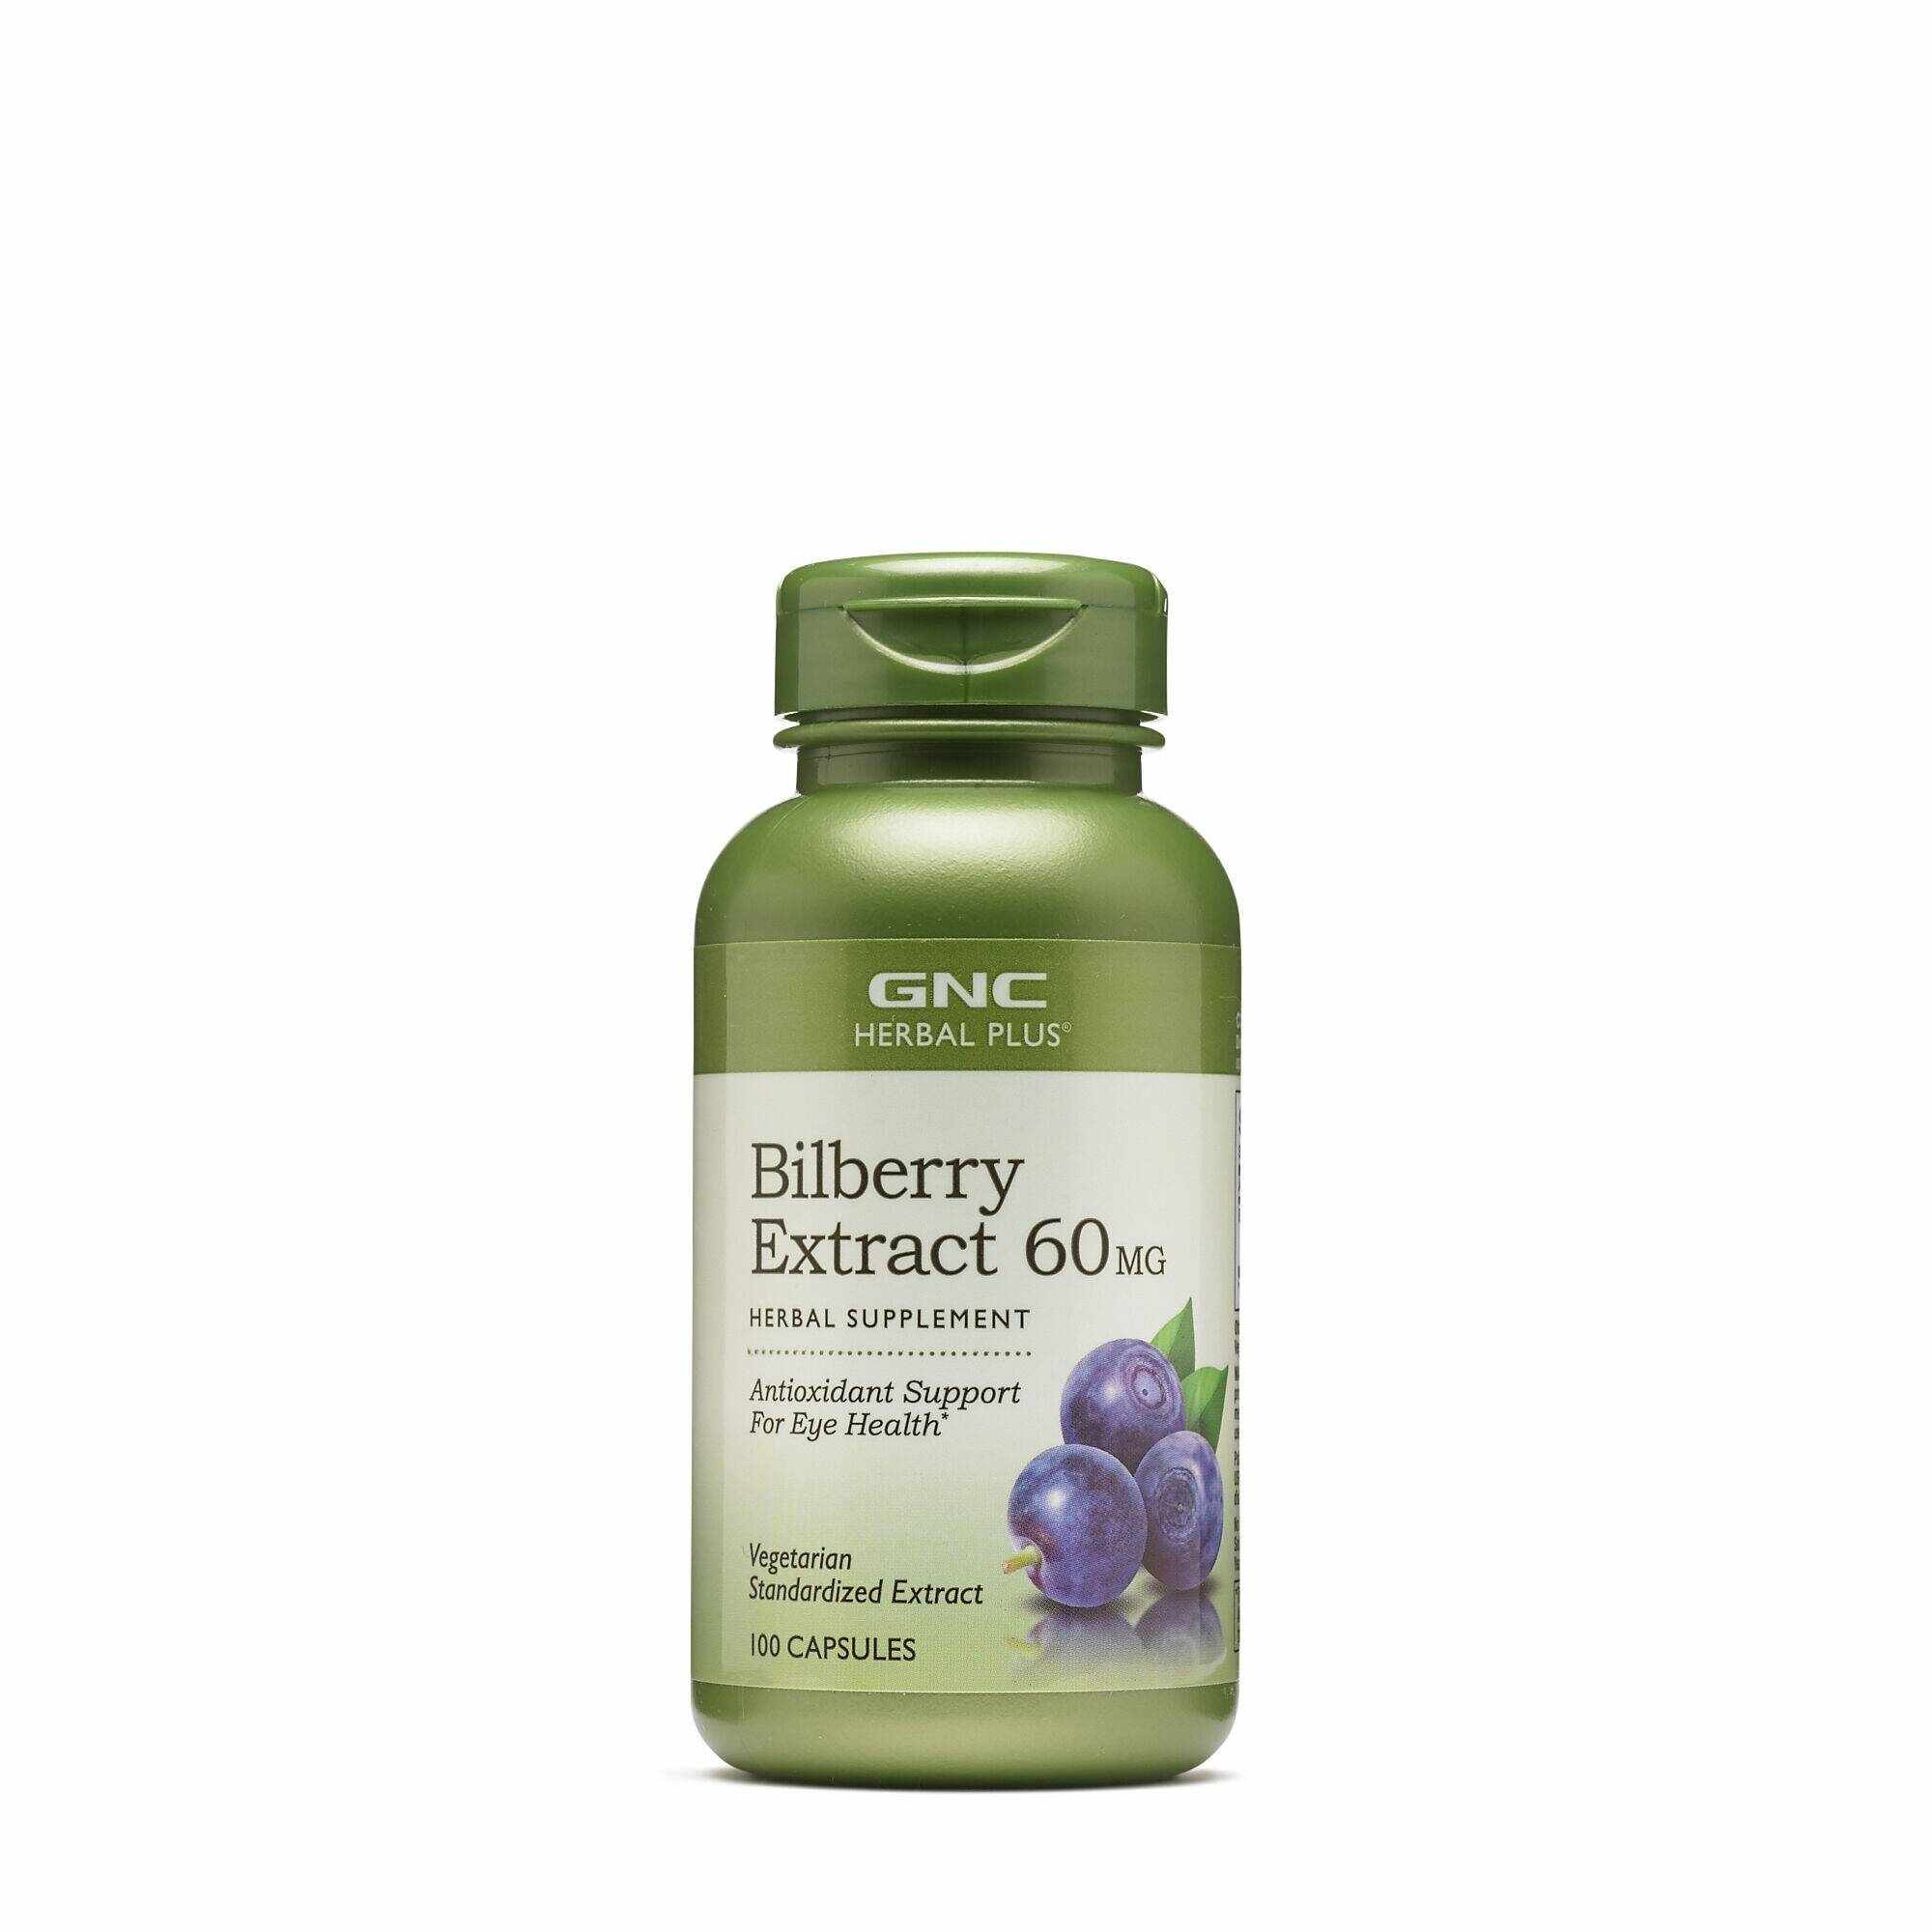 Herbal plus bilberry extract 60mg, extract standardizat din afine, 100cps - Gnc